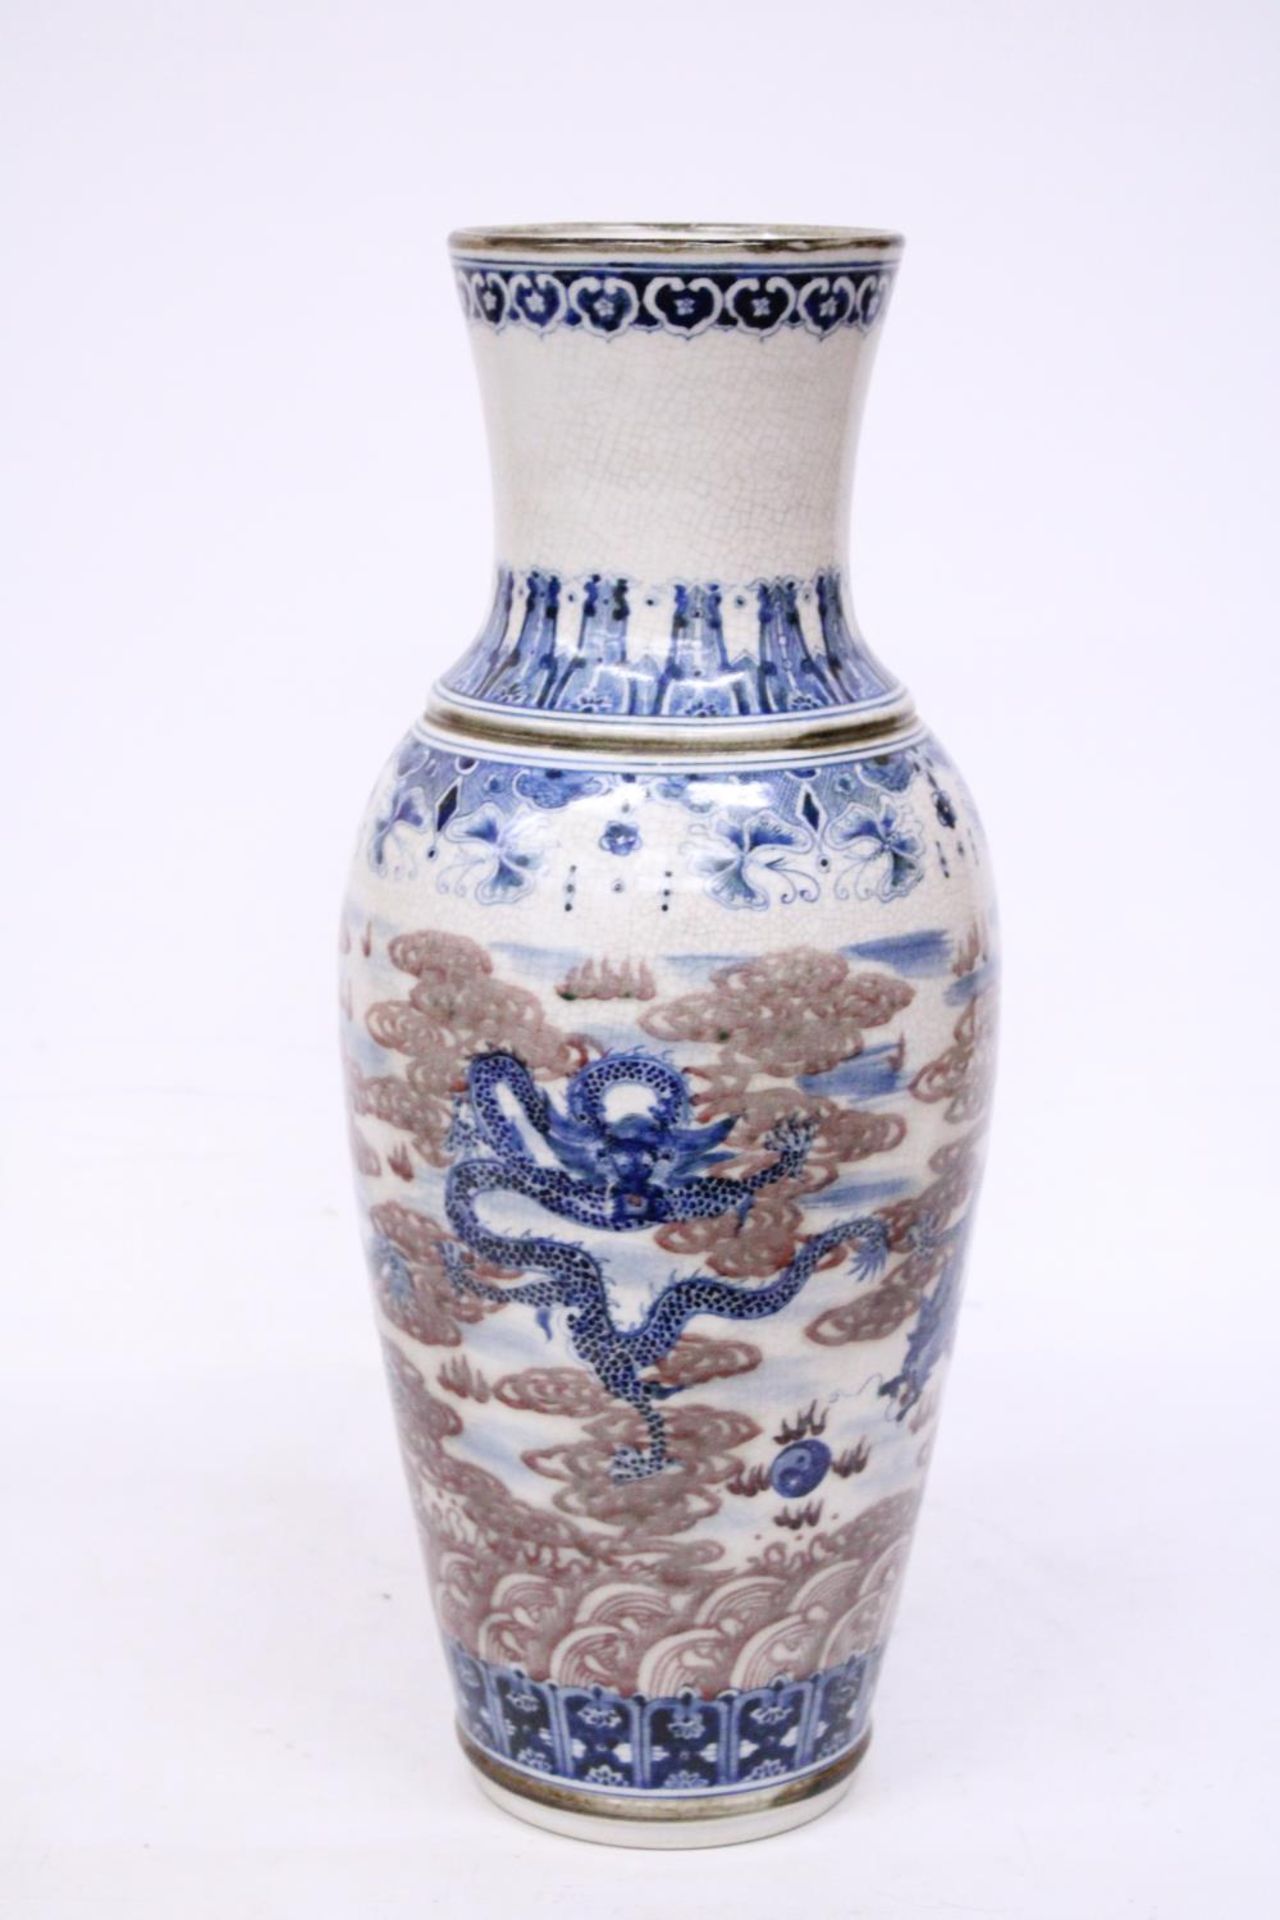 A LARGE PORCELAIN CHINESE GLAZED CRACKLEWARE VASE PORTRAYING DRAGONS WITH CHARACTER MARKS TO THE - Image 2 of 6